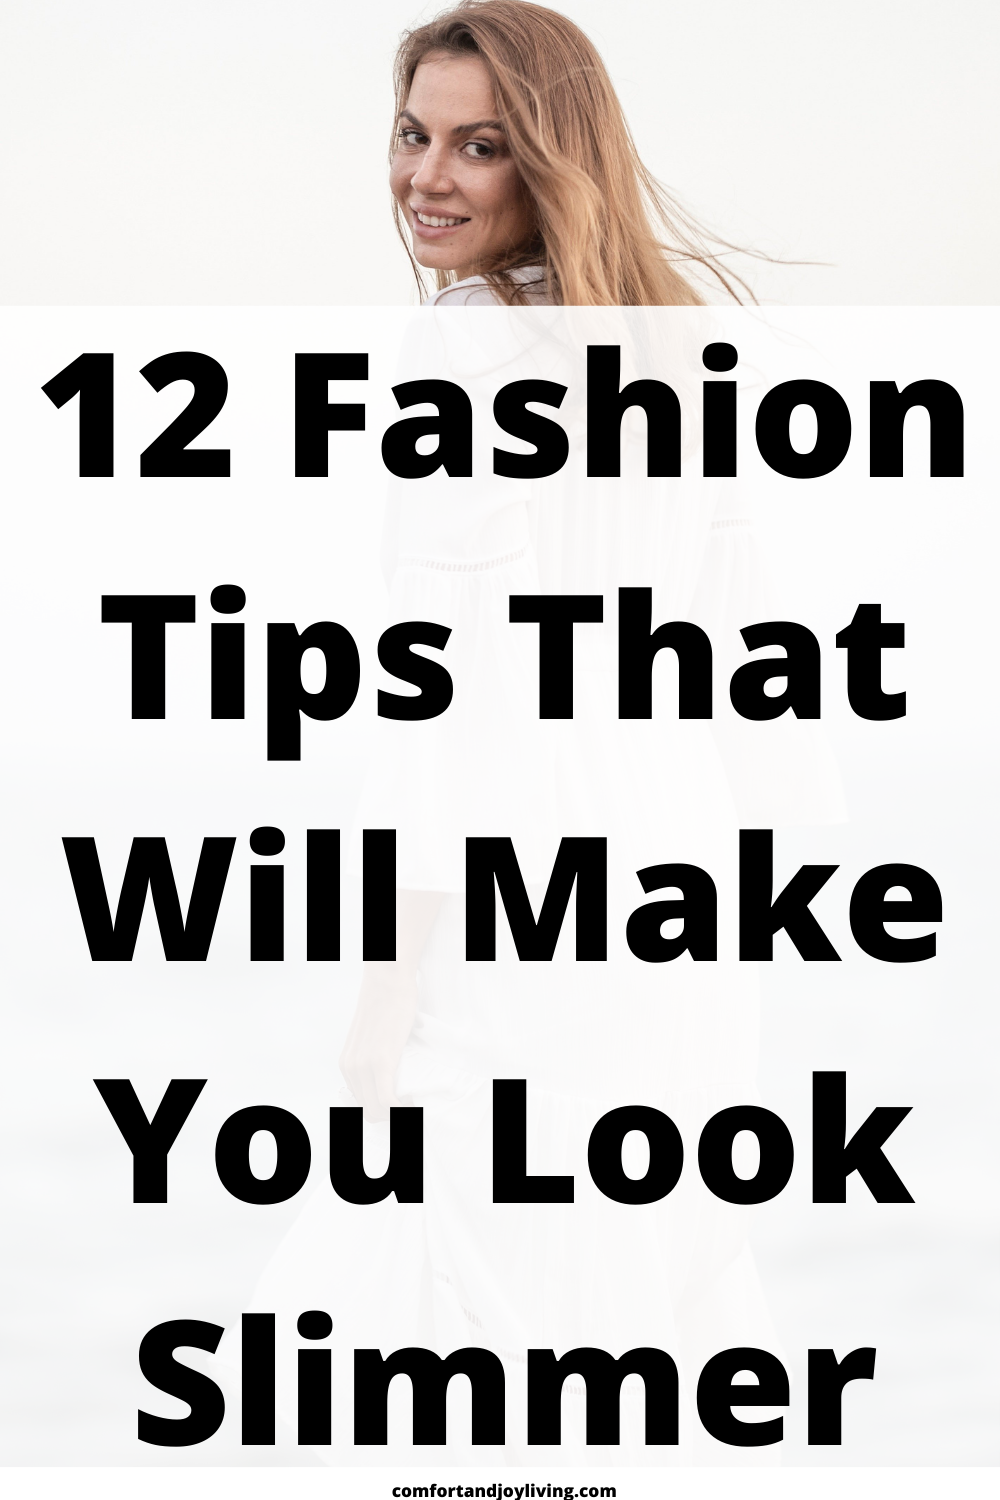 12 Fashion Tips That Will Make You Look Slimmer